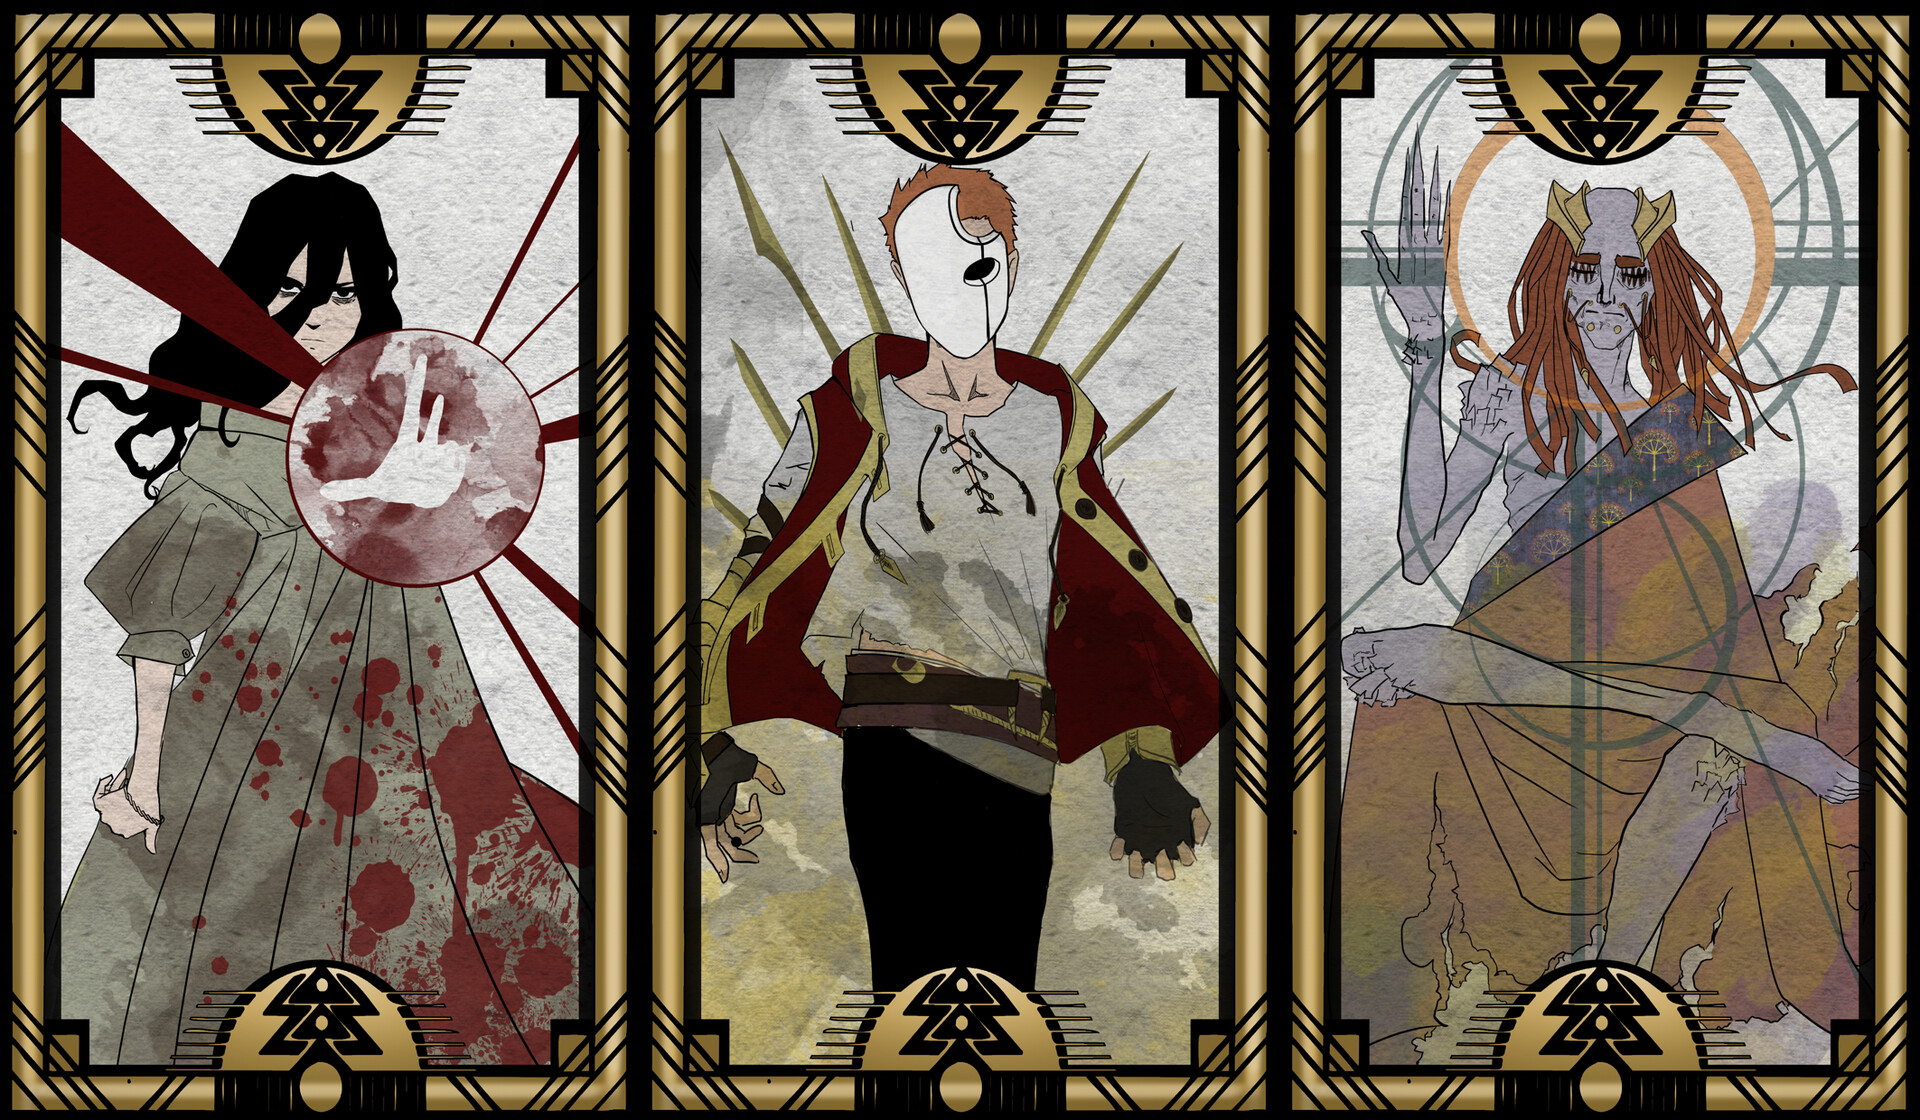 Character cards for my book "Grimoire". 